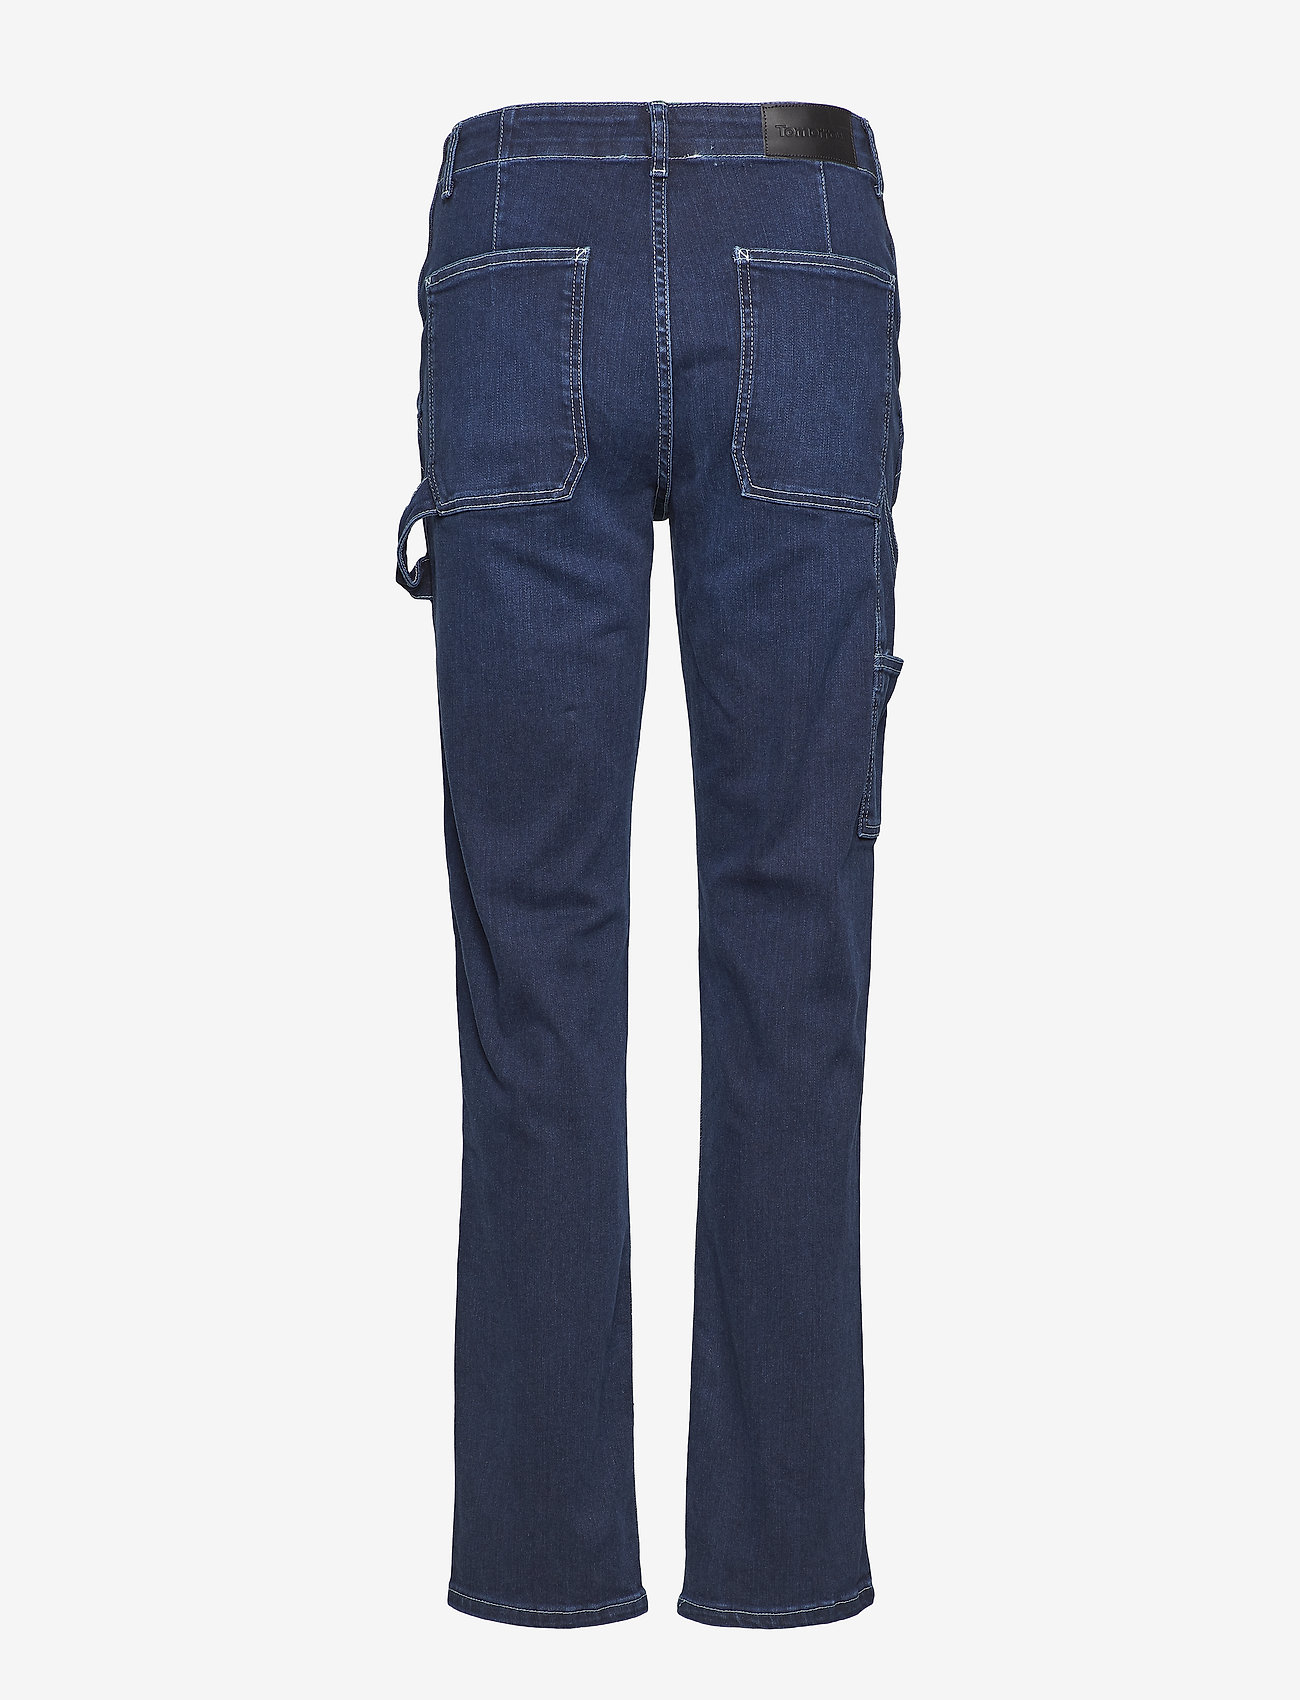 Tomorrow - Lincoln worker pant wash Hounston - straight jeans - 51 denim blue - 1